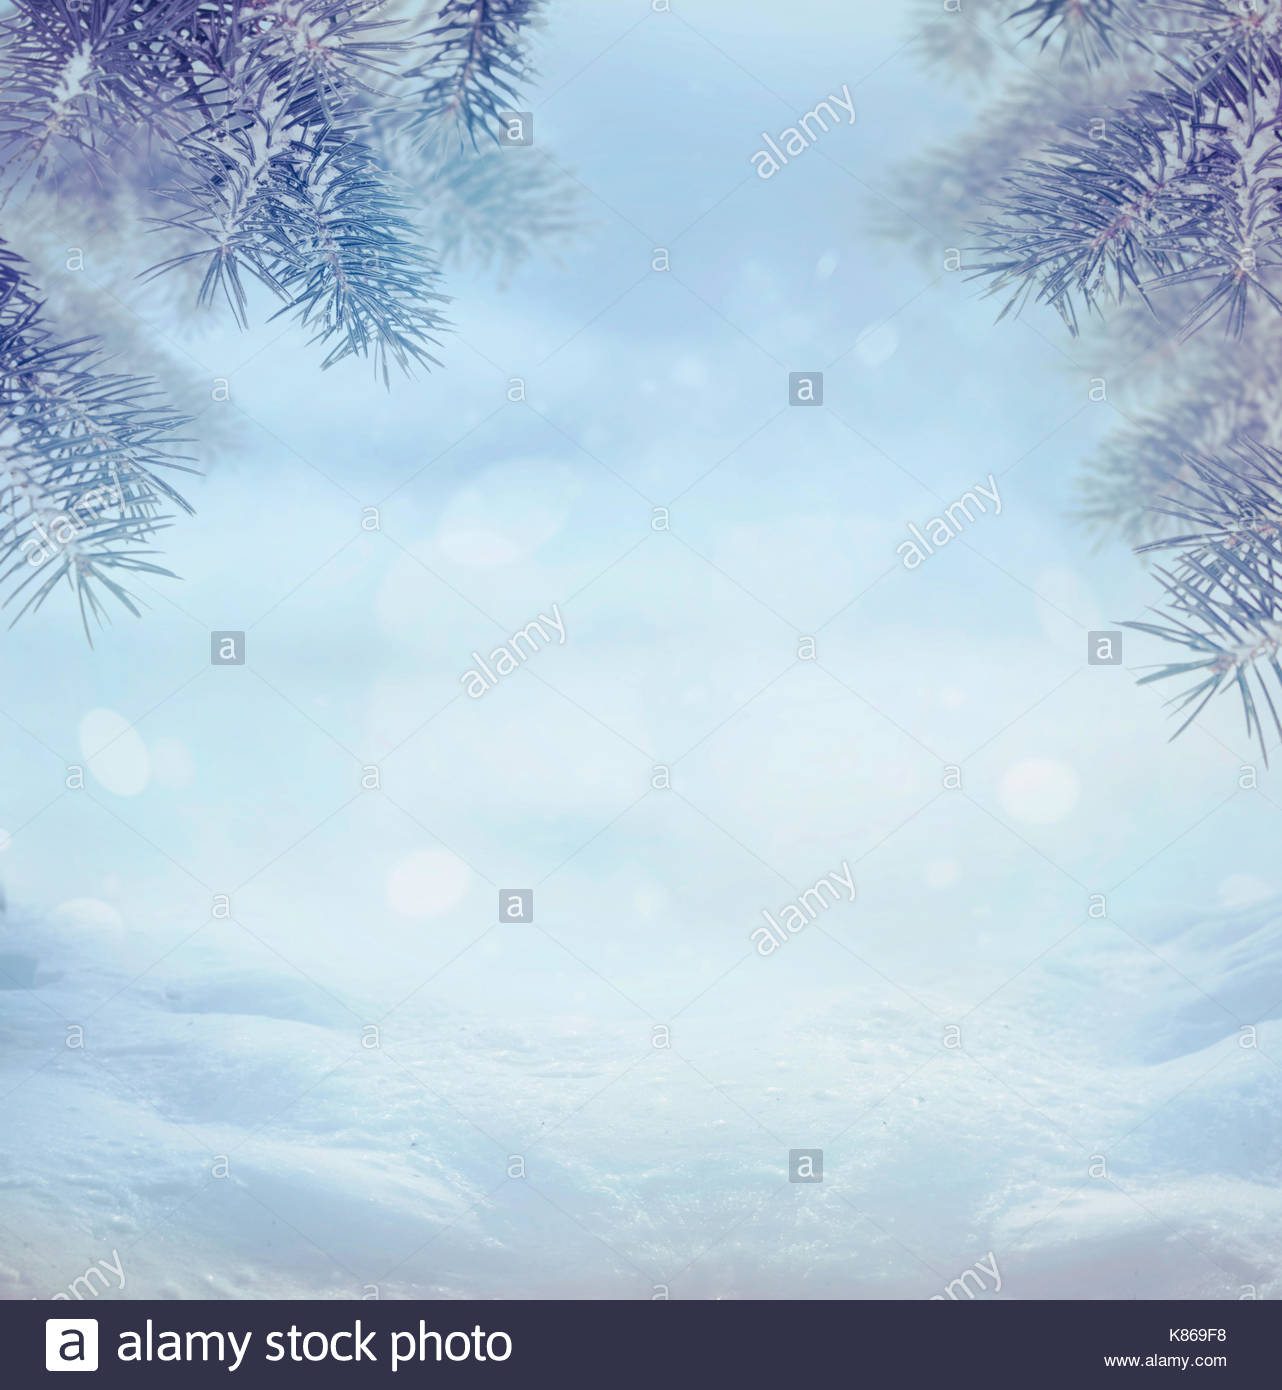 Winter Background Snow Landscape With Flakes Stock